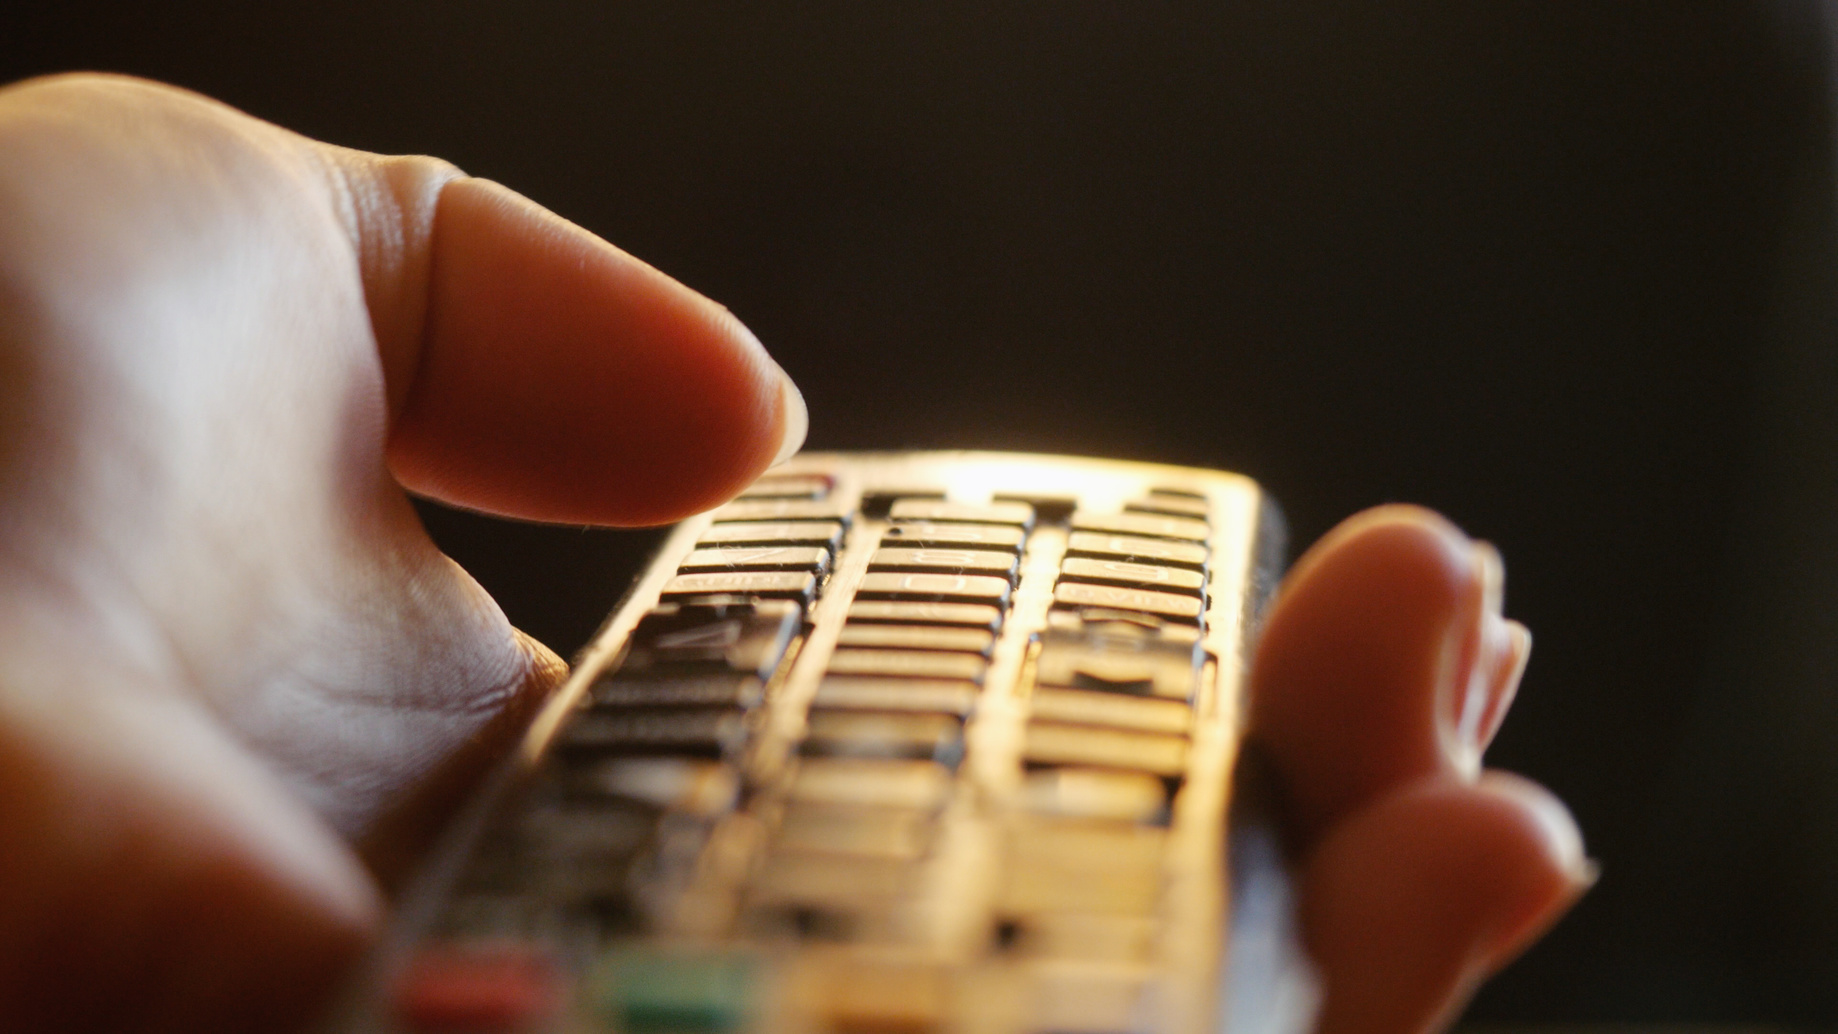 Close up of woman's hand with a television remote control changing channels at sunset time